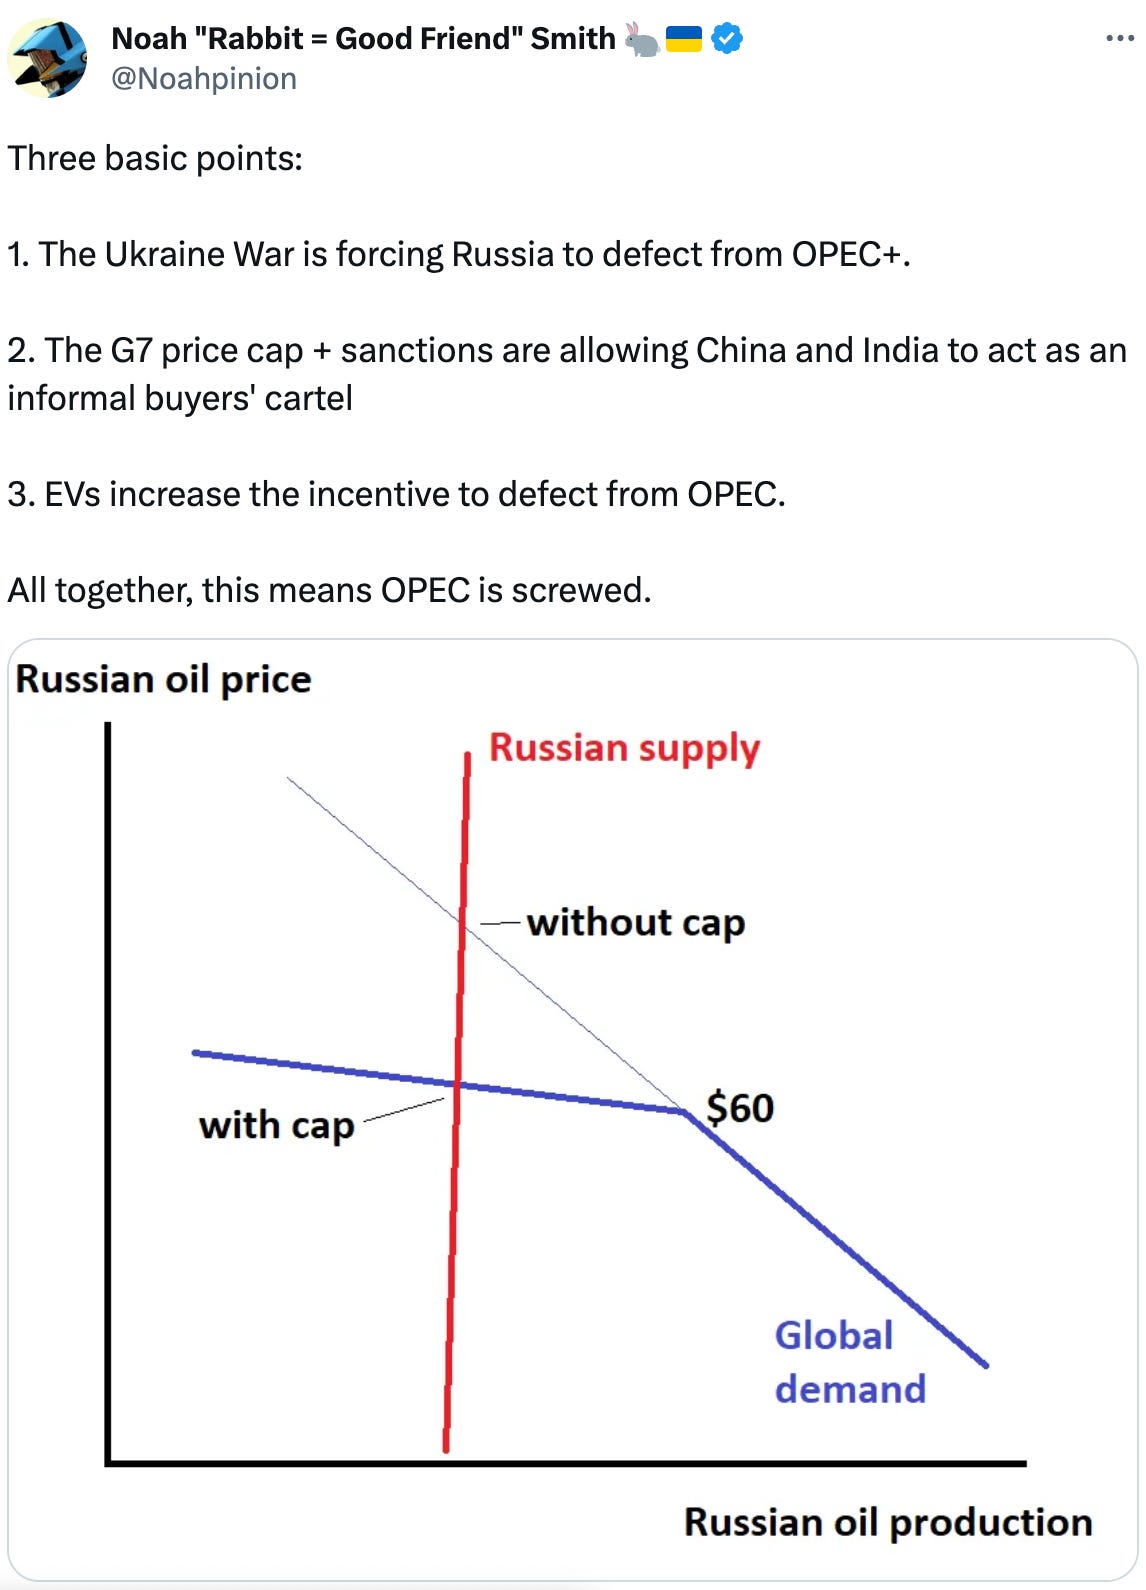  See new Tweets Conversation Noah "Rabbit = Good Friend" Smith 🐇🇺🇦 @Noahpinion · Jun 7 Market power in the global oil industry might be decisively shifting from sellers to buyers, as OPEC flounders, EVs rise, and the G7 forms a de facto buyers' cartel with China and India.  If so, we're in for an era of cheap oil. noahpinion.blog The reverse OPEC maneuver Pricing power in the oil industry is shifting, and will shift more. Noah "Rabbit = Good Friend" Smith 🐇🇺🇦 @Noahpinion Three basic points:  1. The Ukraine War is forcing Russia to defect from OPEC+.  2. The G7 price cap + sanctions are allowing China and India to act as an informal buyers' cartel  3. EVs increase the incentive to defect from OPEC.  All together, this means OPEC is screwed.